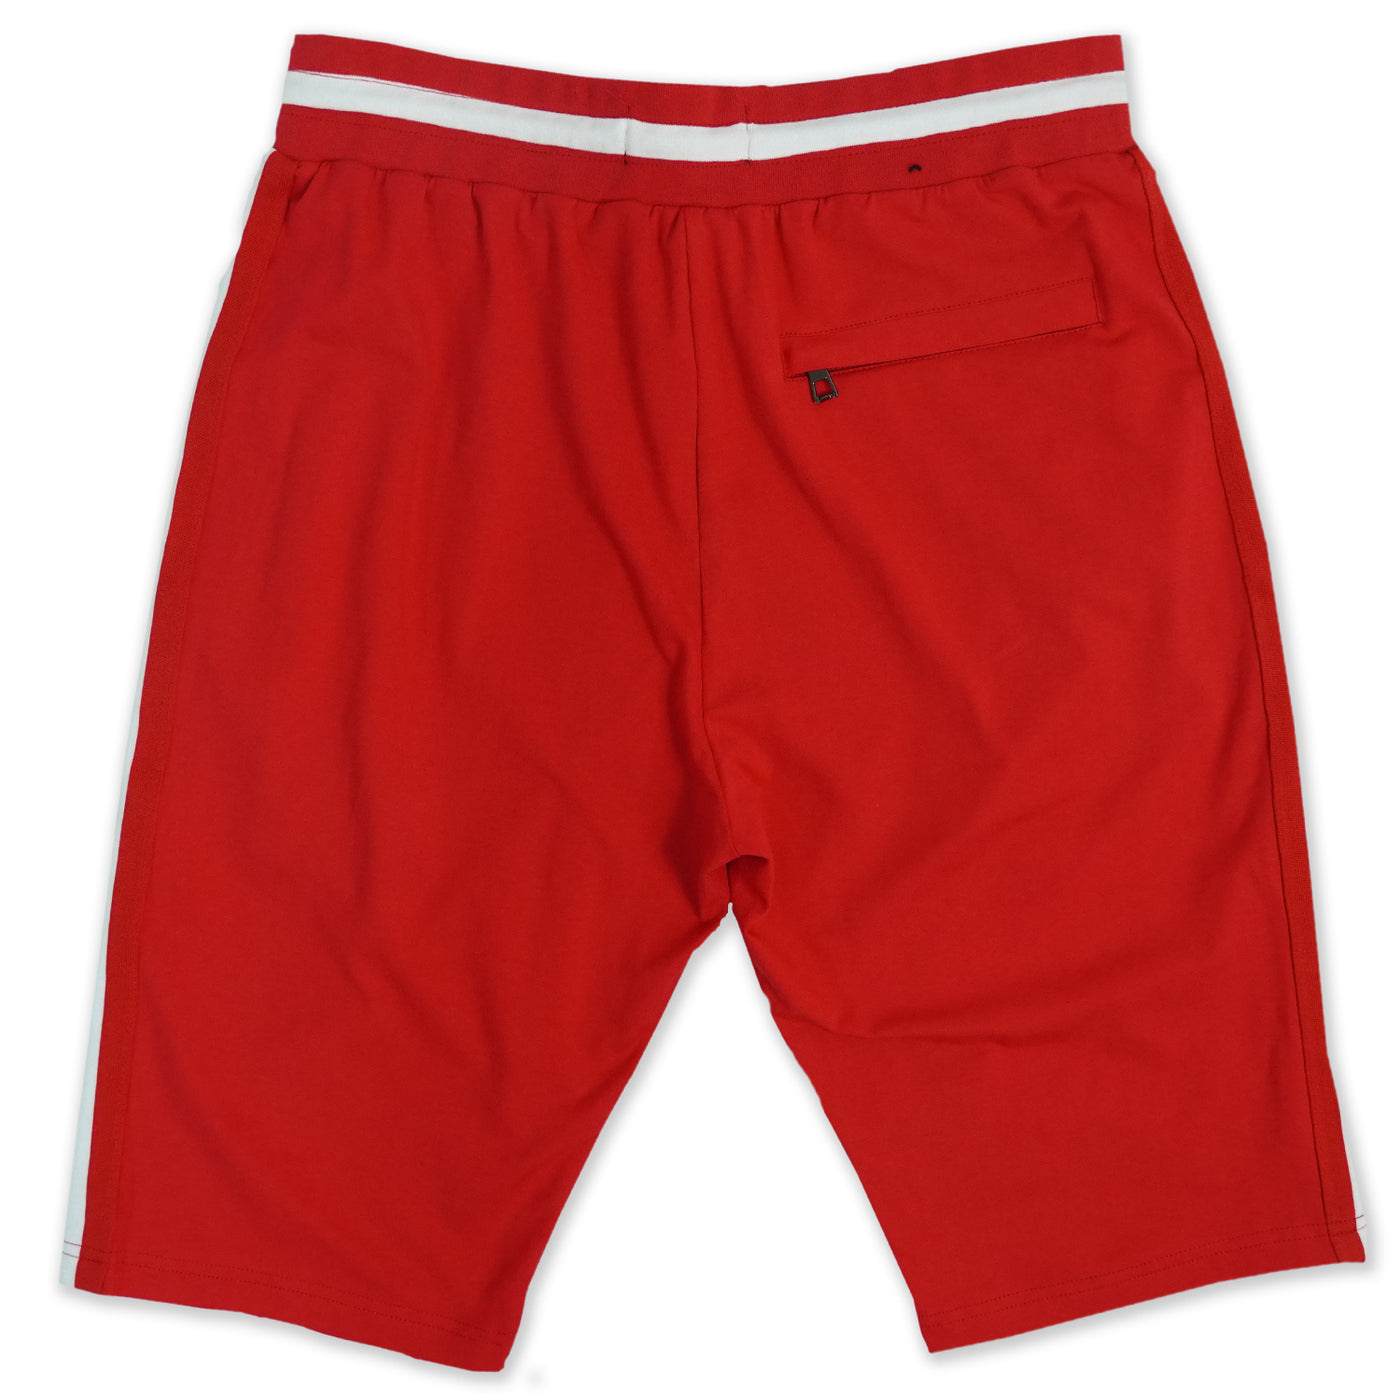 M600 Knit Shorts - Red